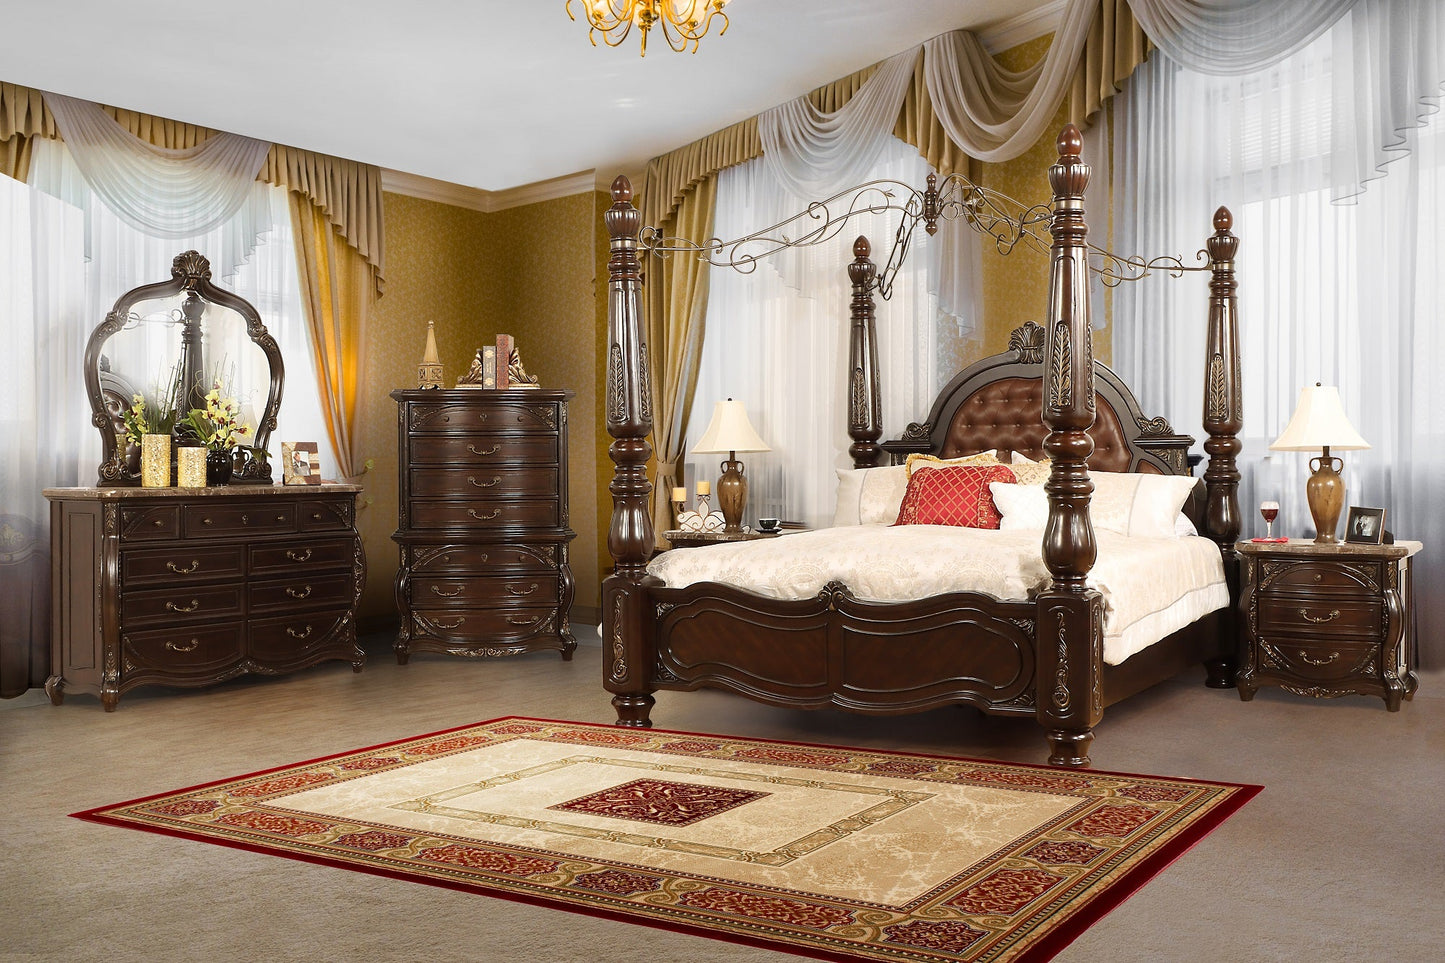 Royal Palazzo Marble & Canopy Queen Size Bedroom Set